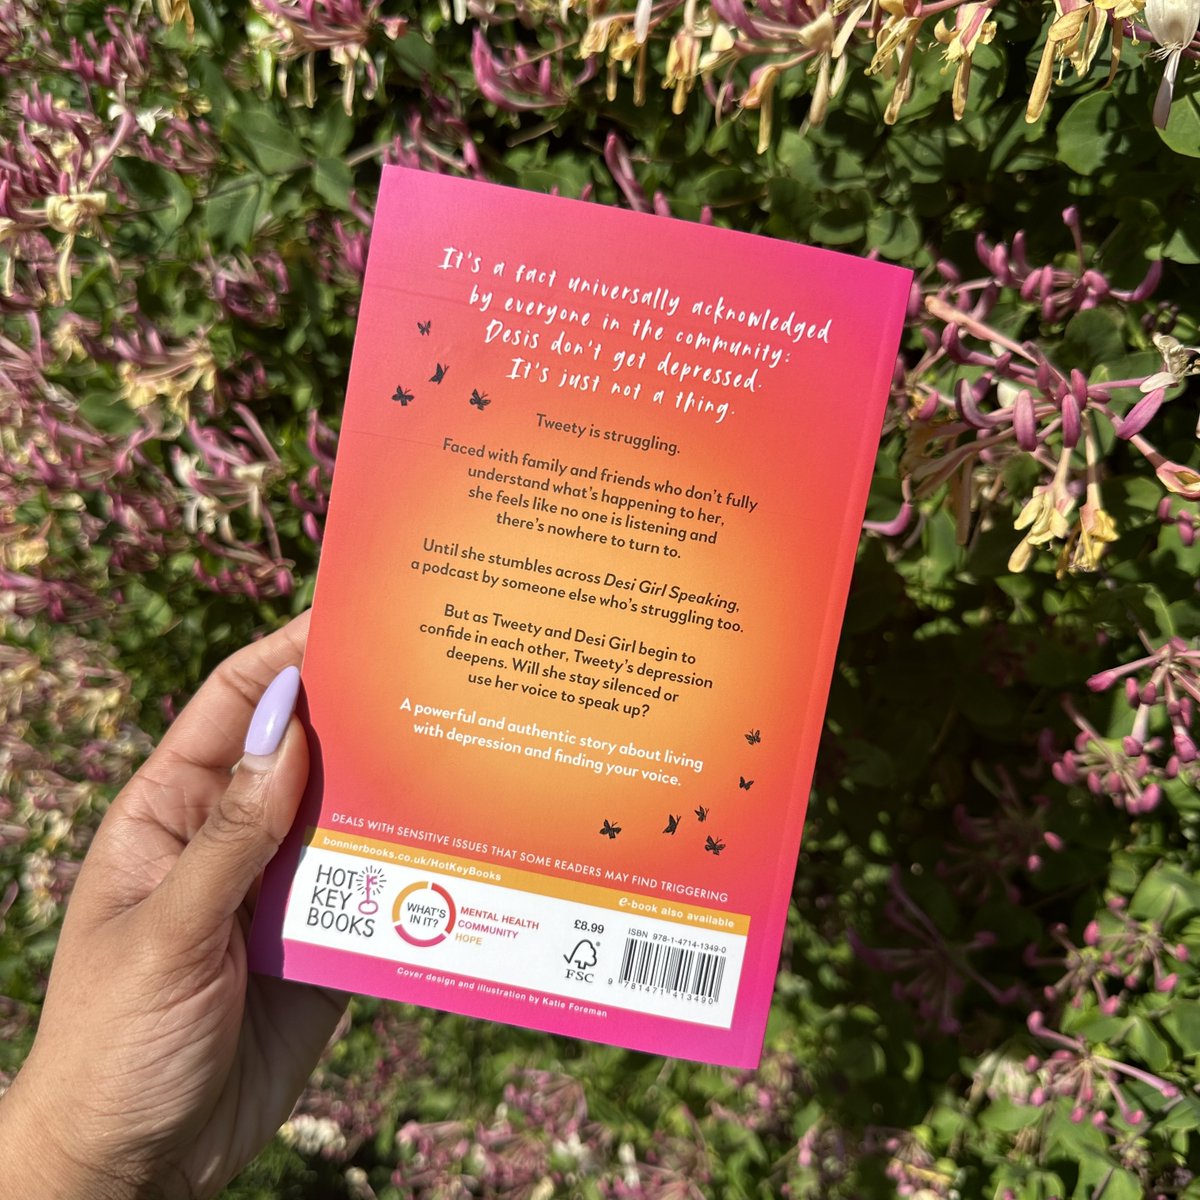 🦋 Desi Girl Speaking 🦋 'It is a story not only of struggling but also of resilience, of family & friendships & finding your voice. To all of you who are hurting silently: it gets better, I promise.' - @huanika We're so proud to publish this book today: lnk.to/DesiGirlSpeaki…